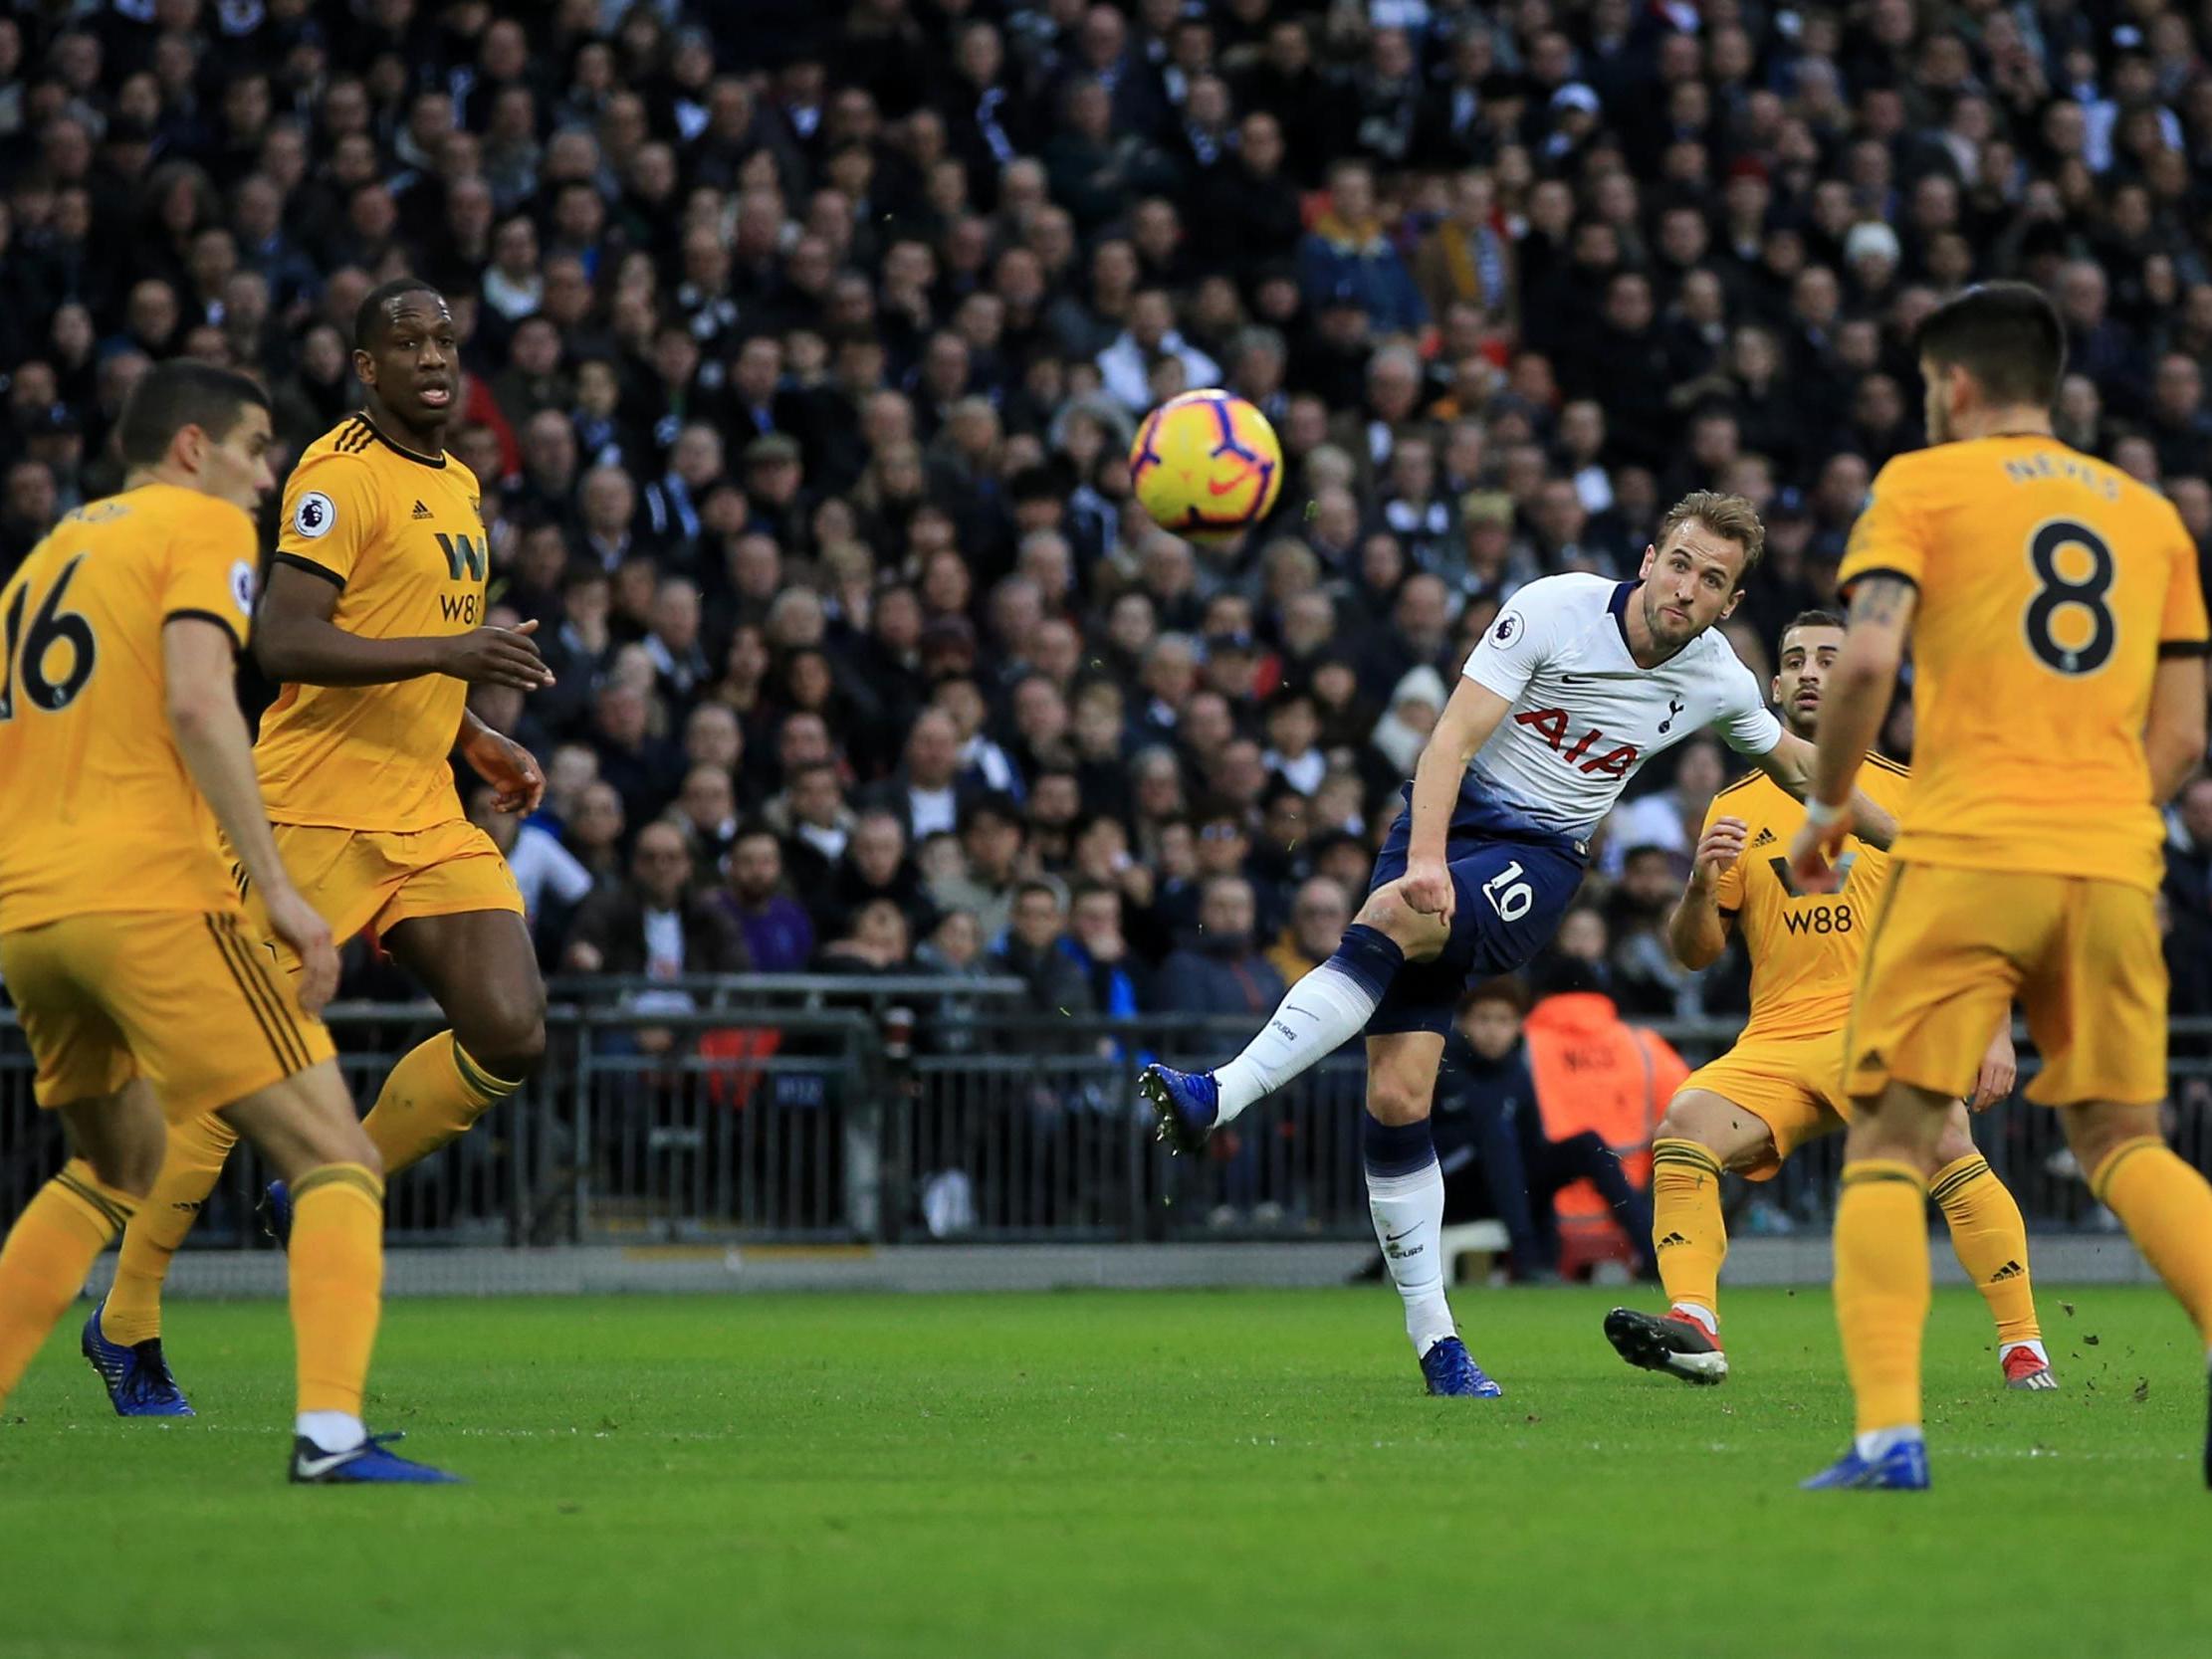 The Tottenham forward curled in a sublime opener for his side